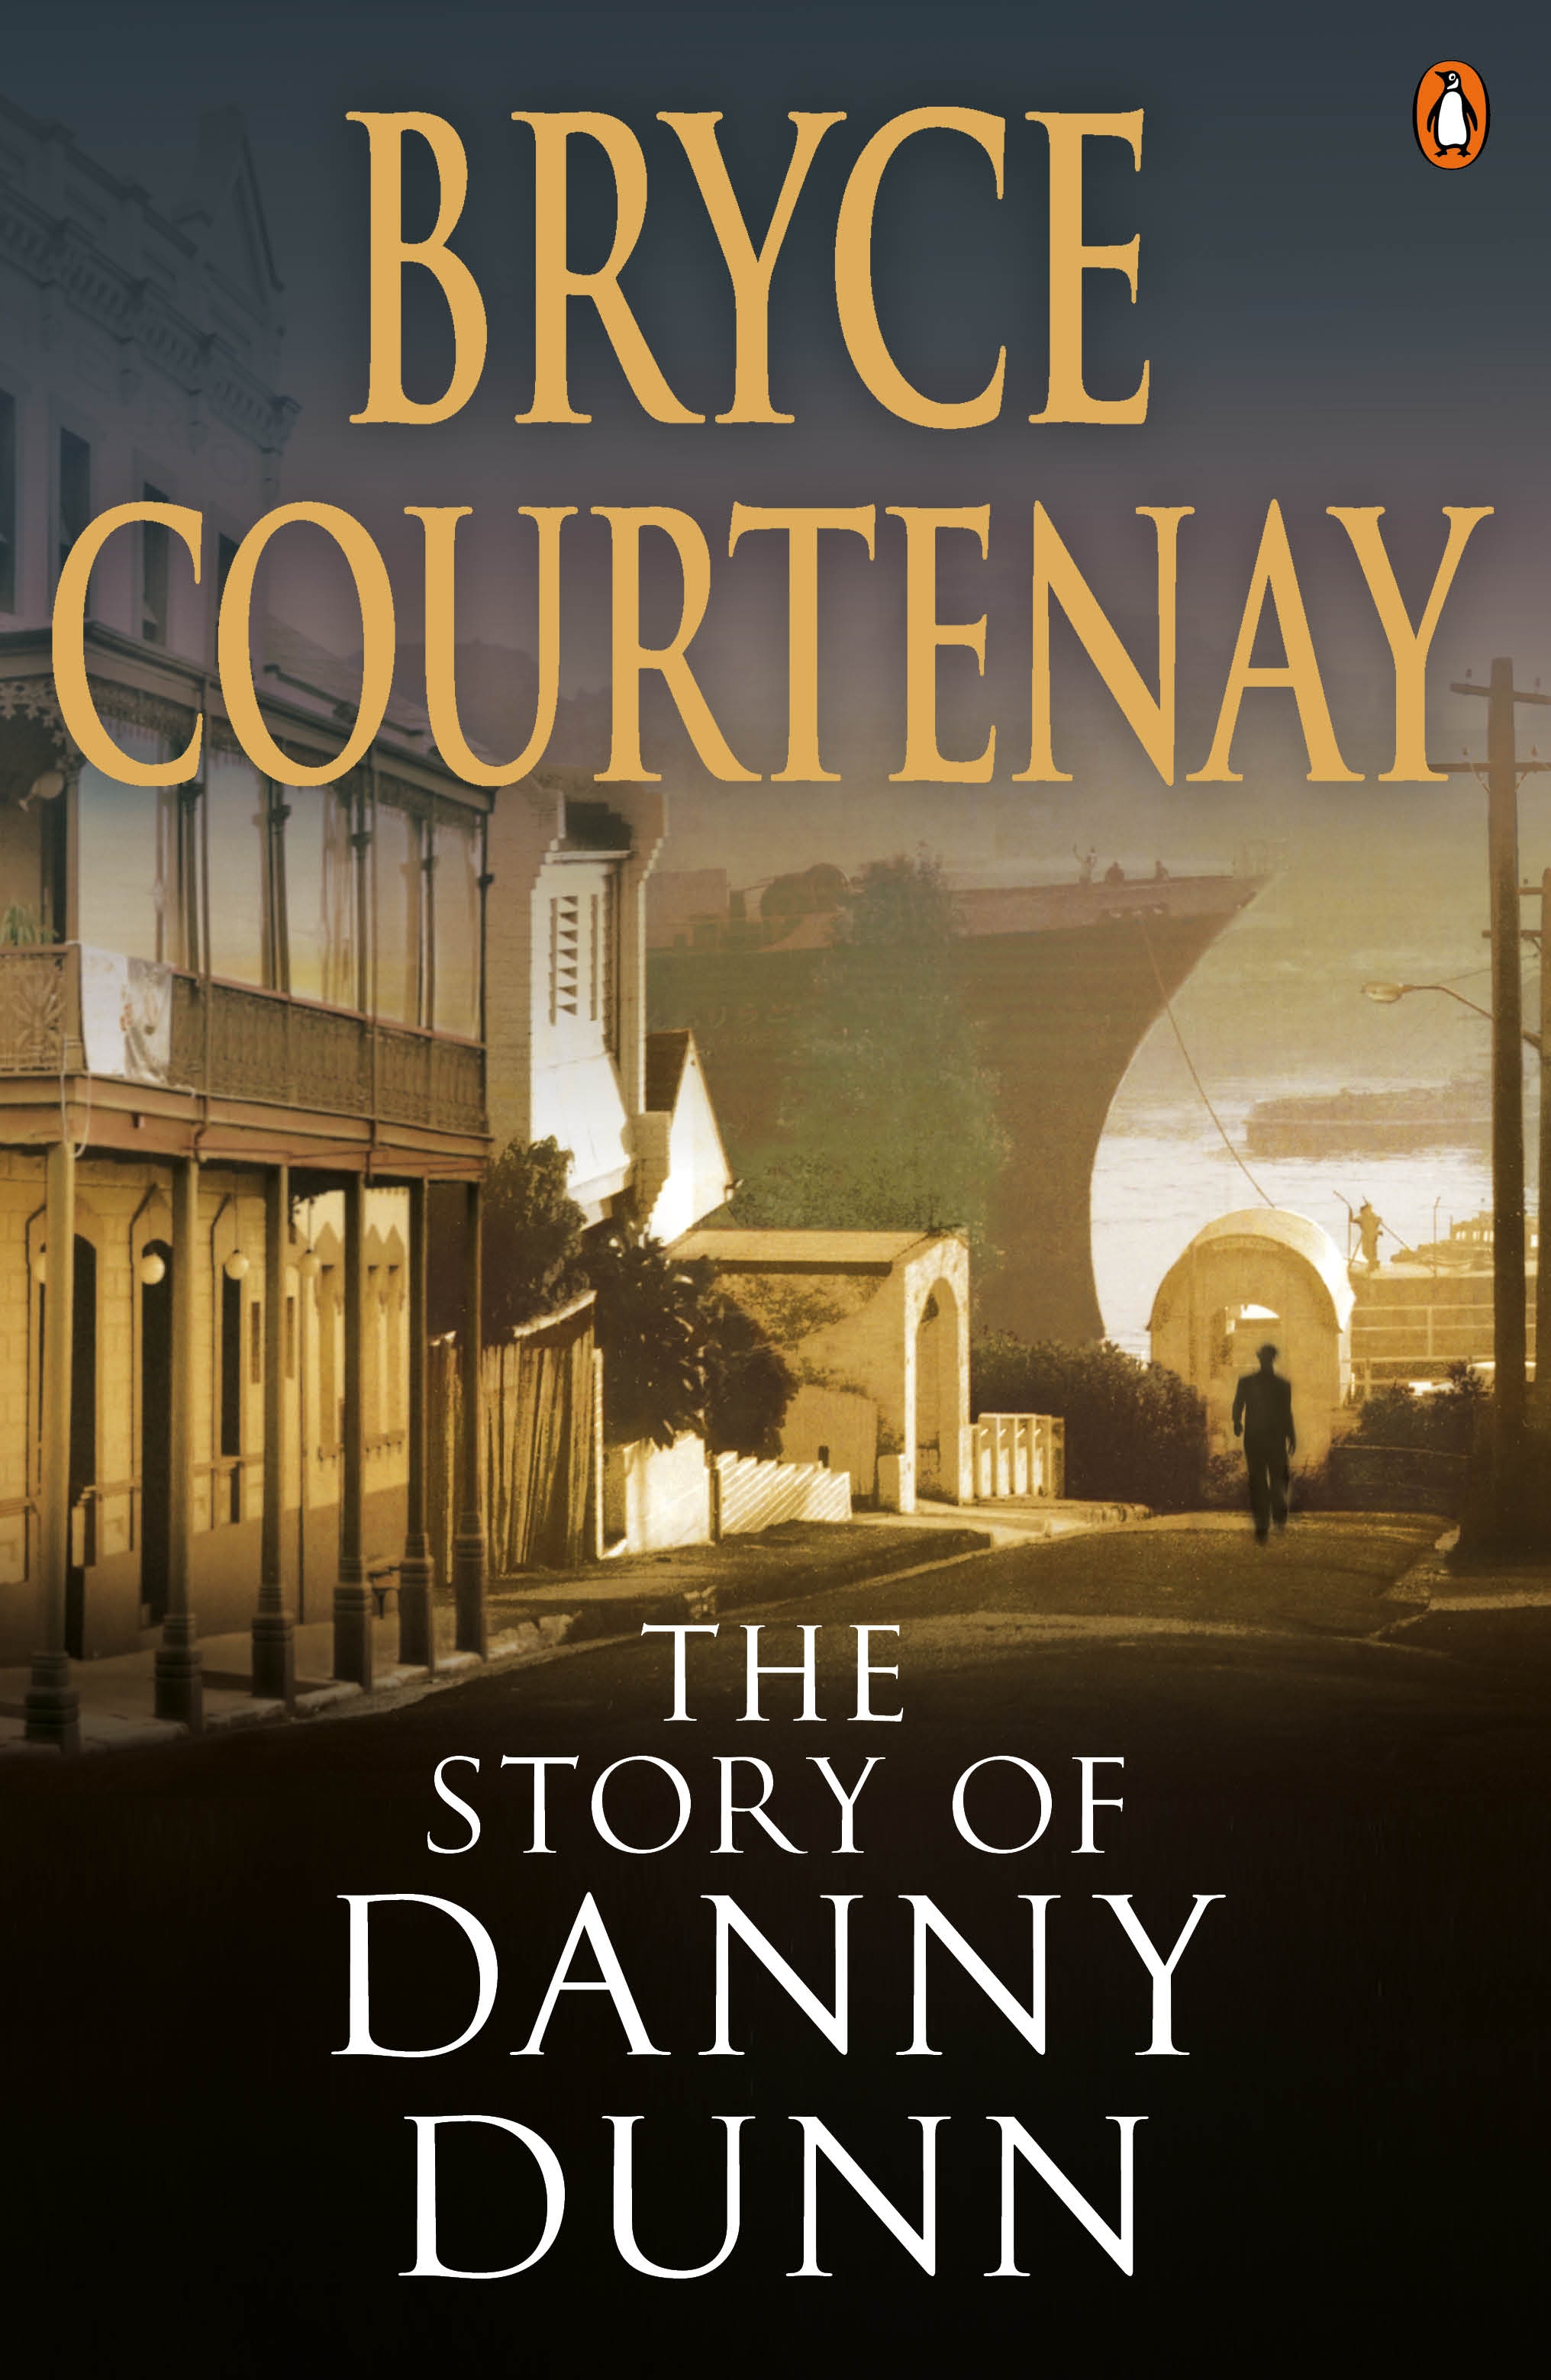 The Story Of Danny Dunn by Bryce Courtenay - Penguin Books Australia